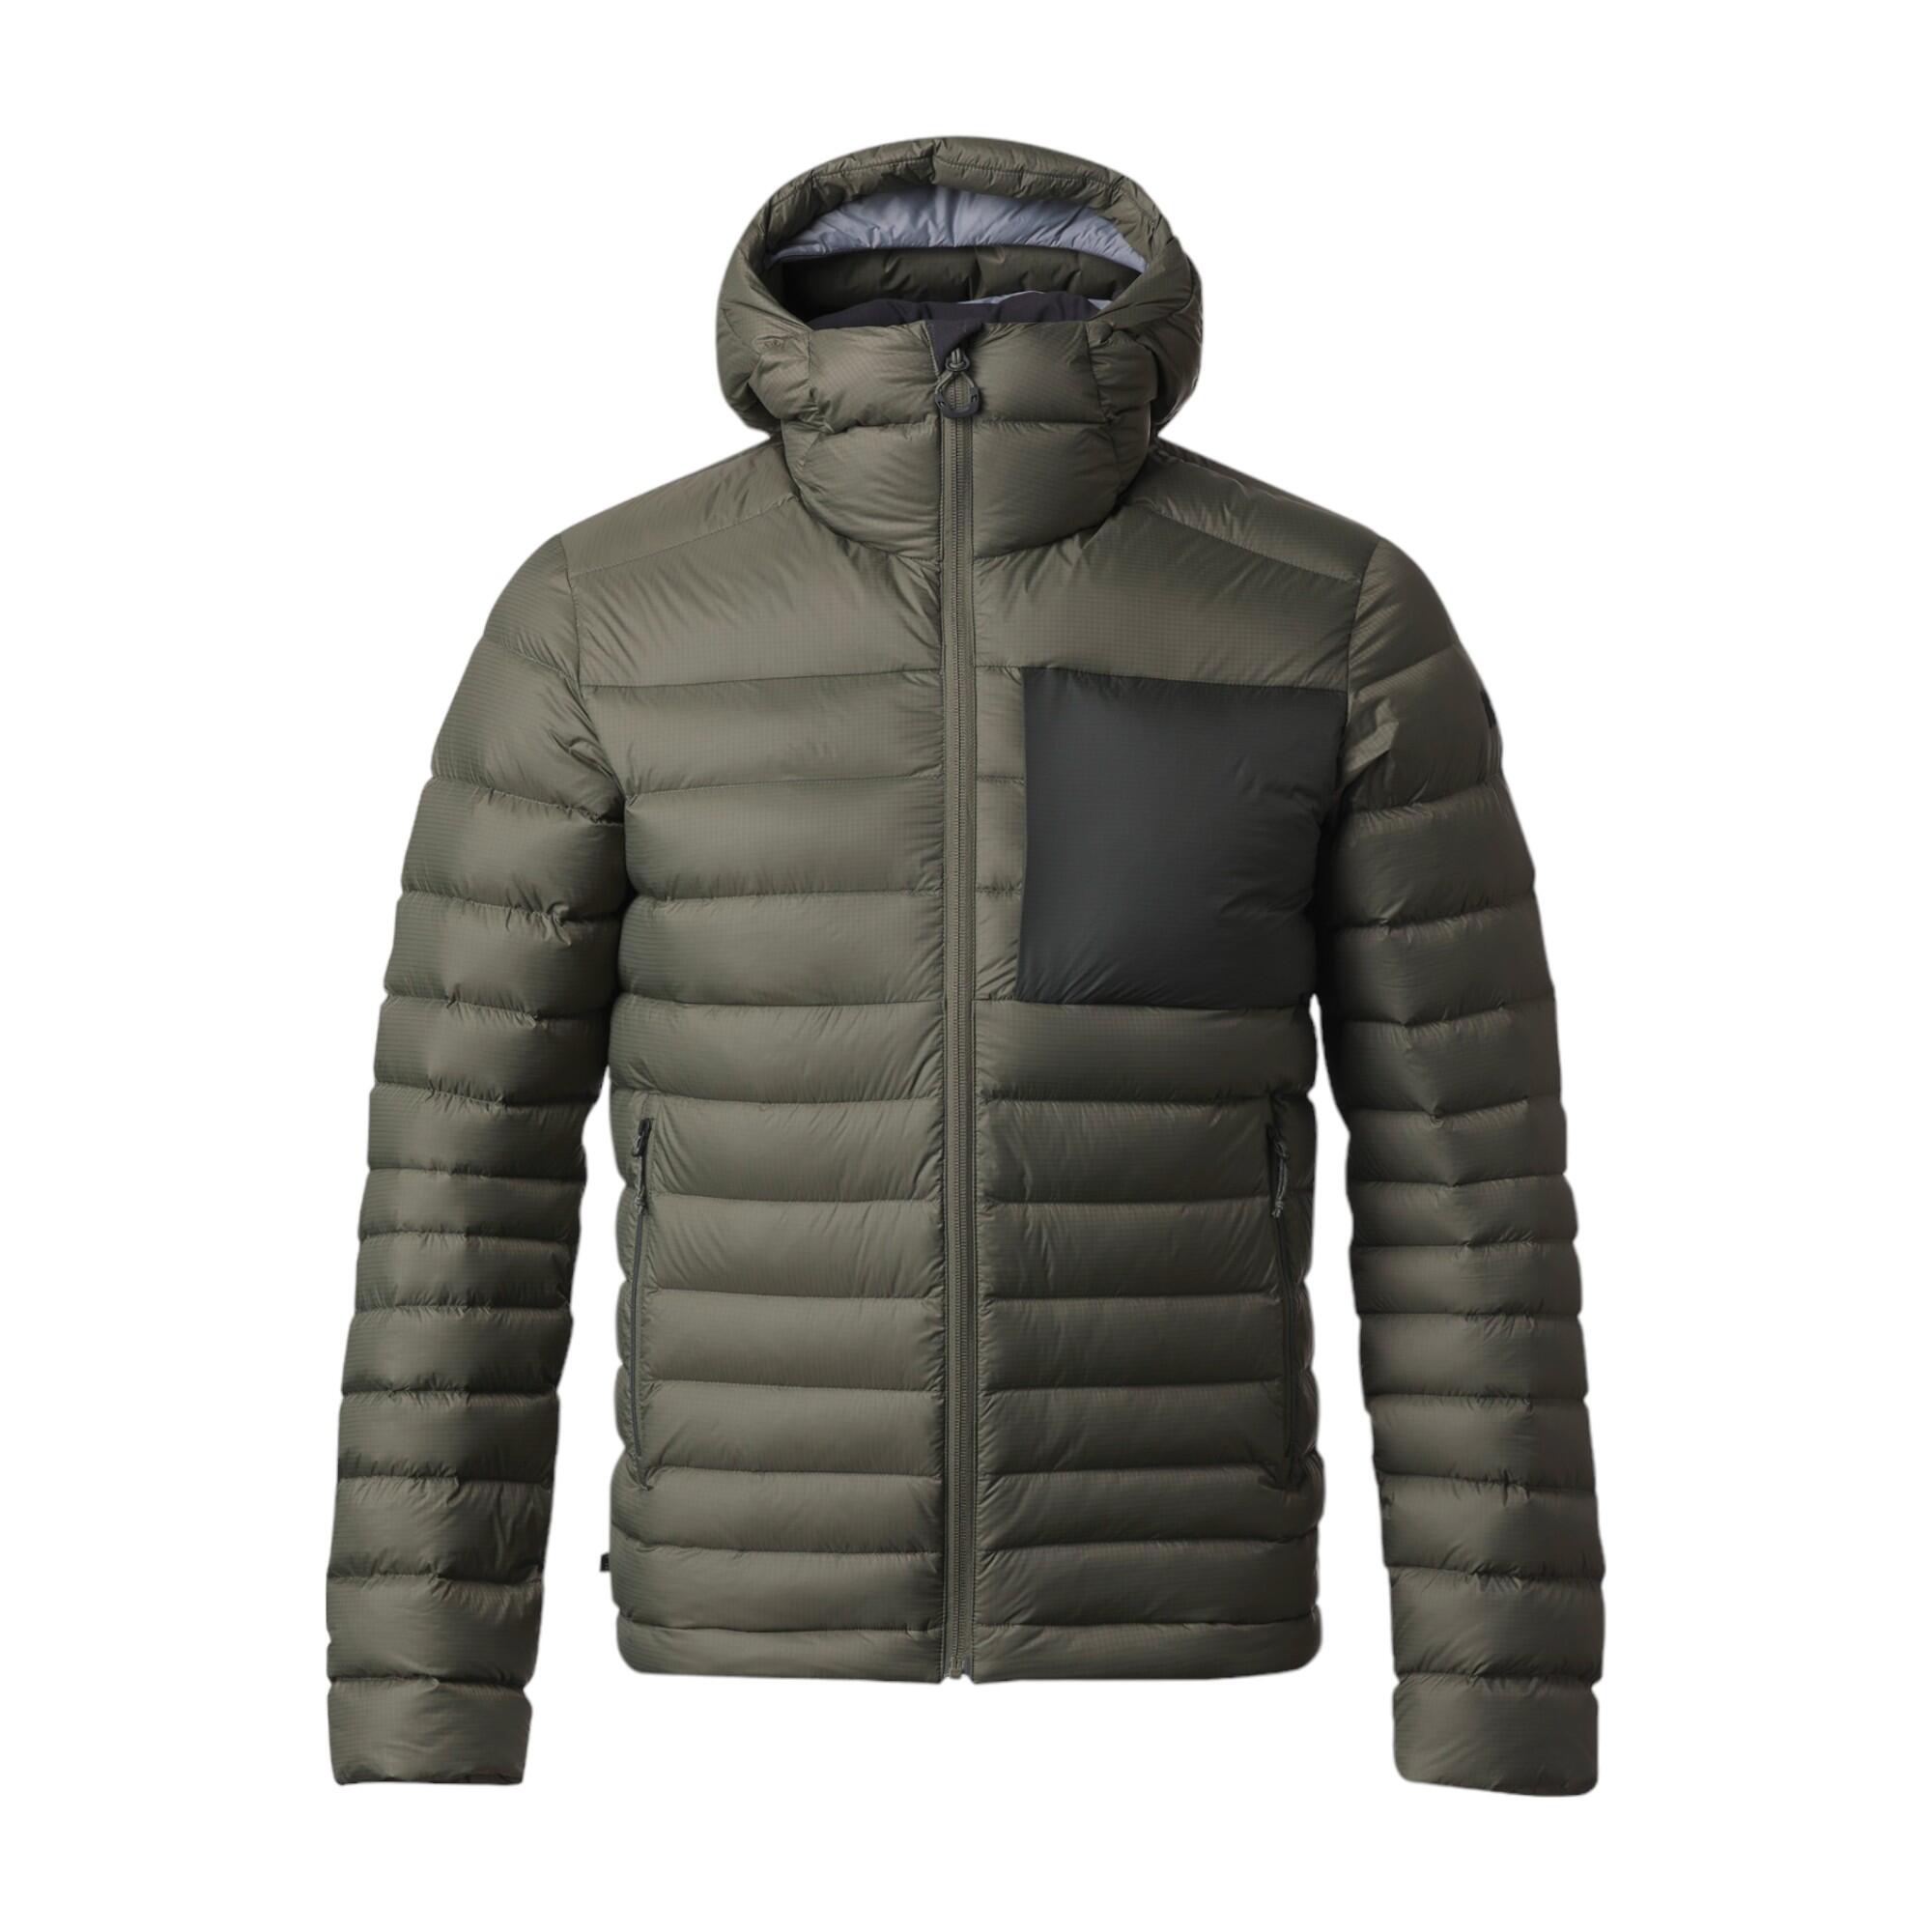 Men's Down and Padded Hiking Jackets